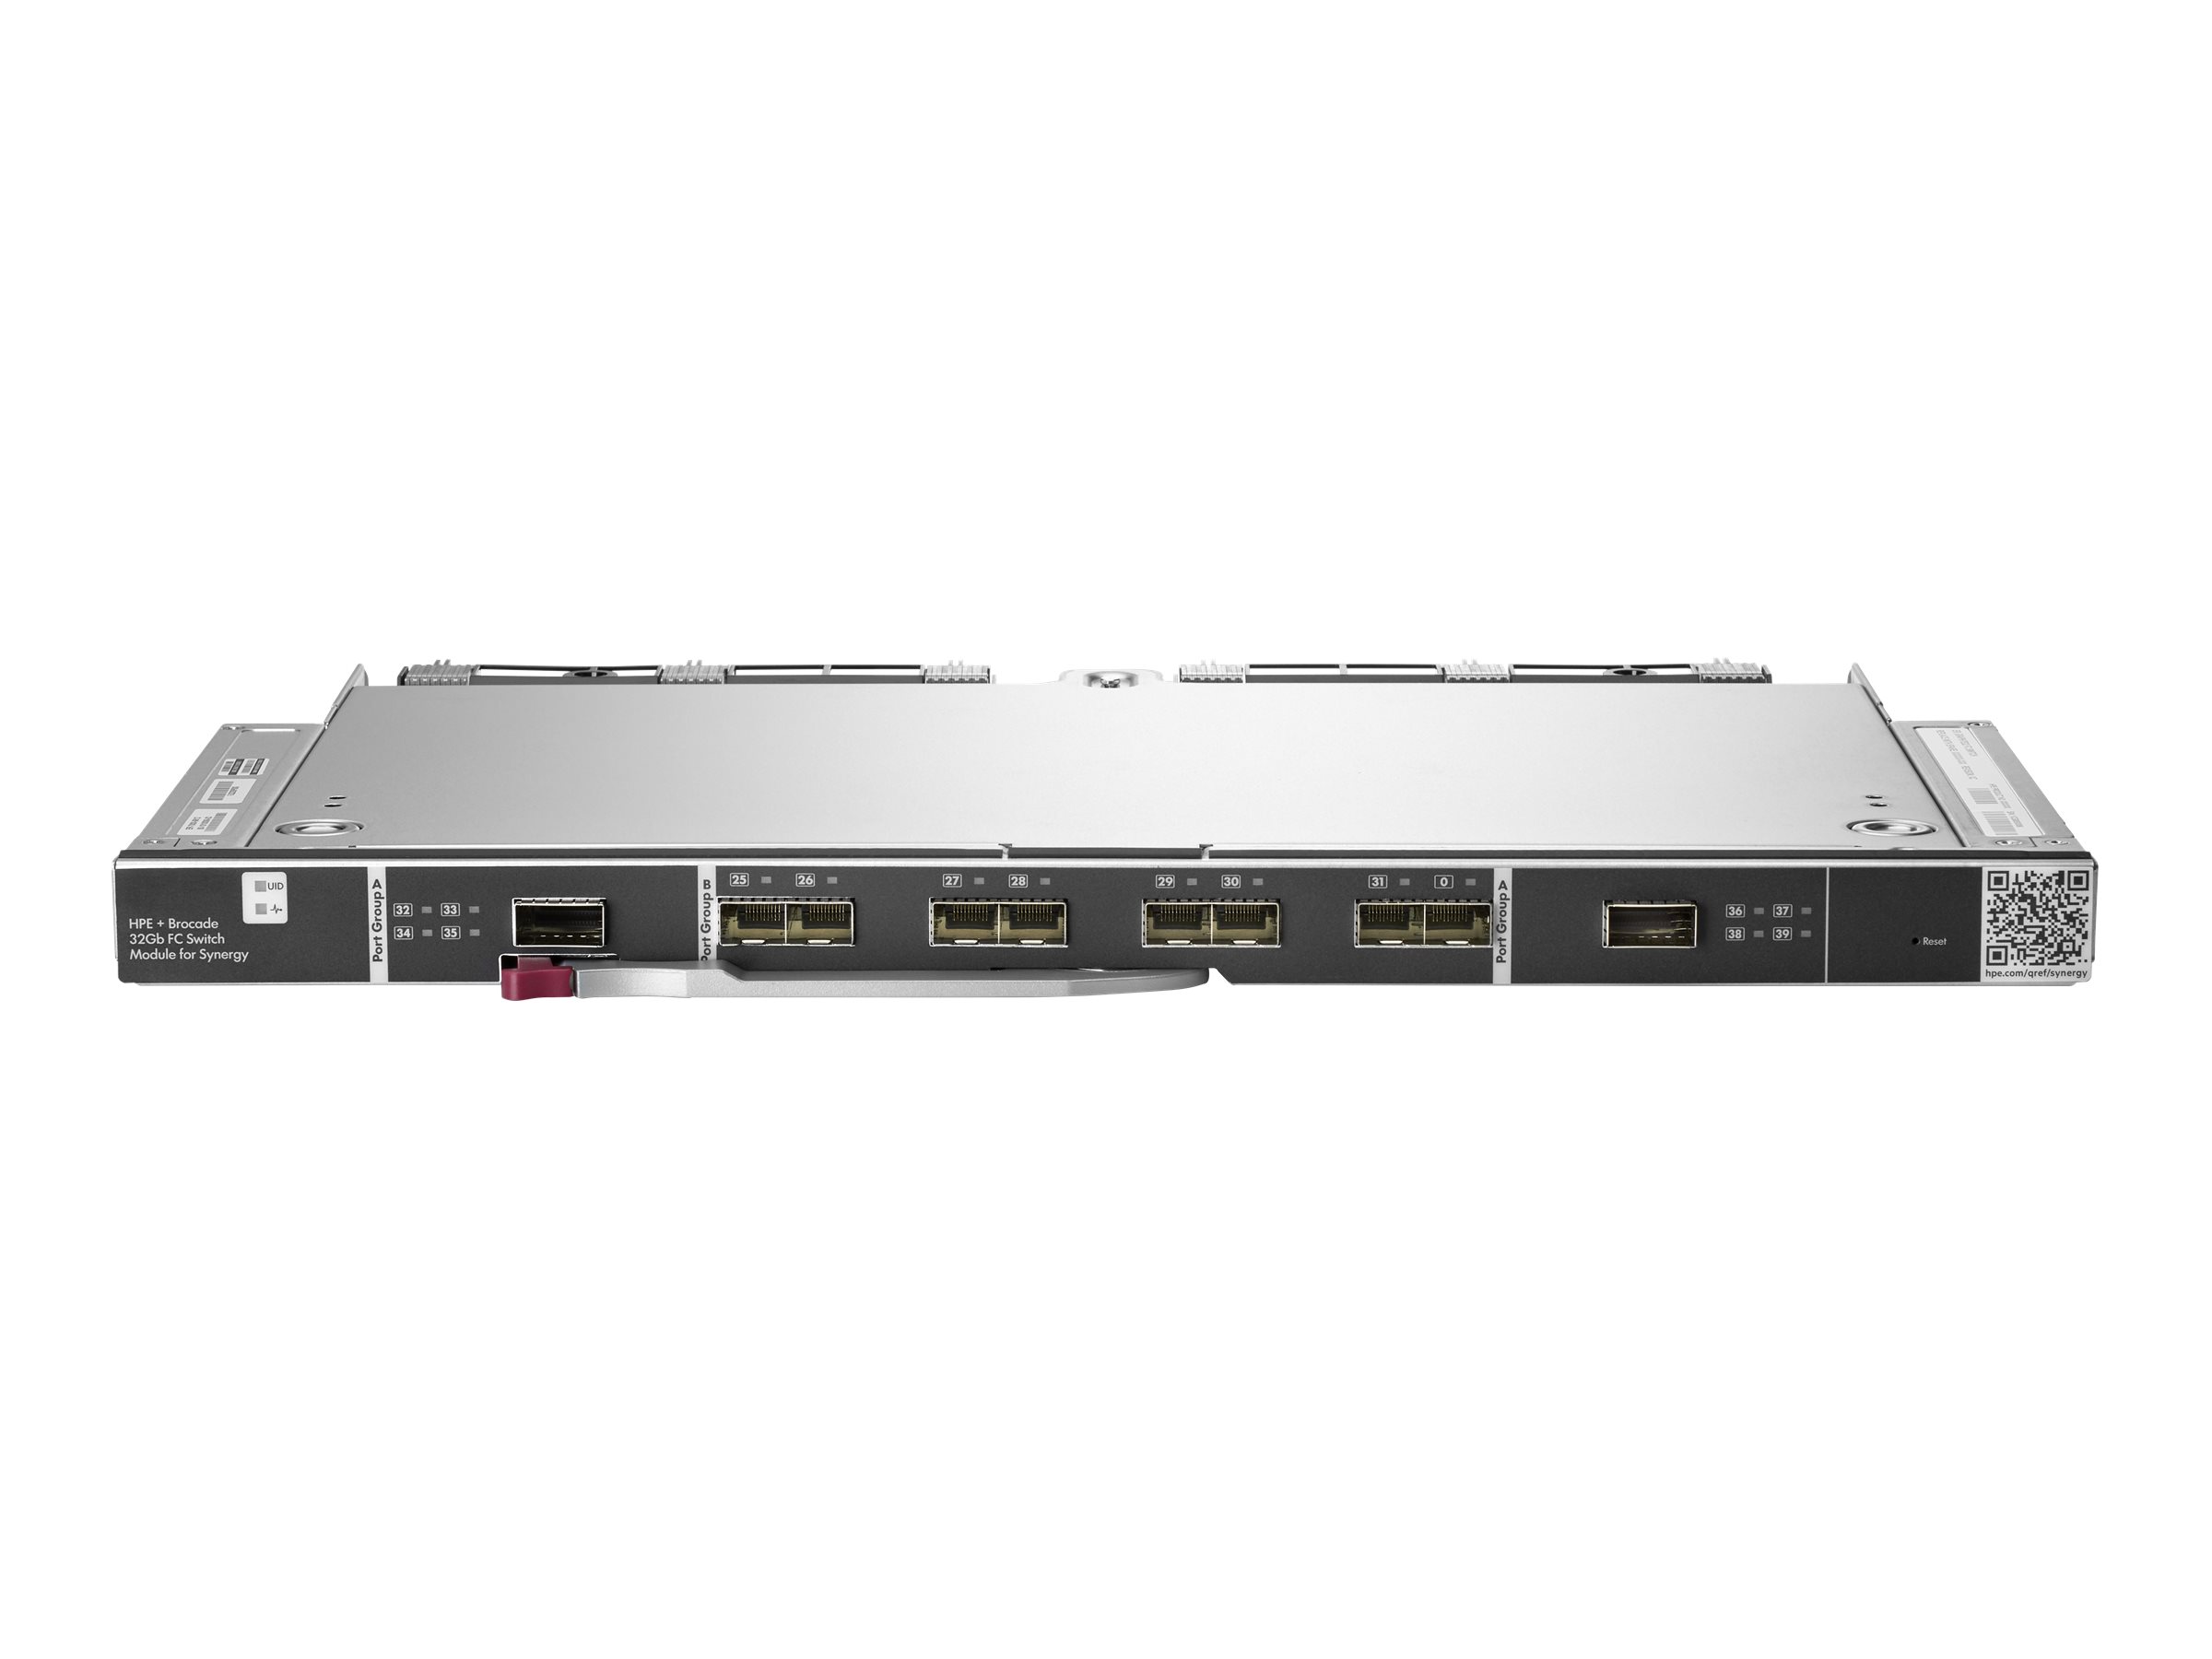 Brocade 32Gb/20 SAN Switch Module Power Pack+for HPE Synergy - Switch - managed - 16 x 32Gb Fibre Channel + 4 x 32Gb Fibre Chann